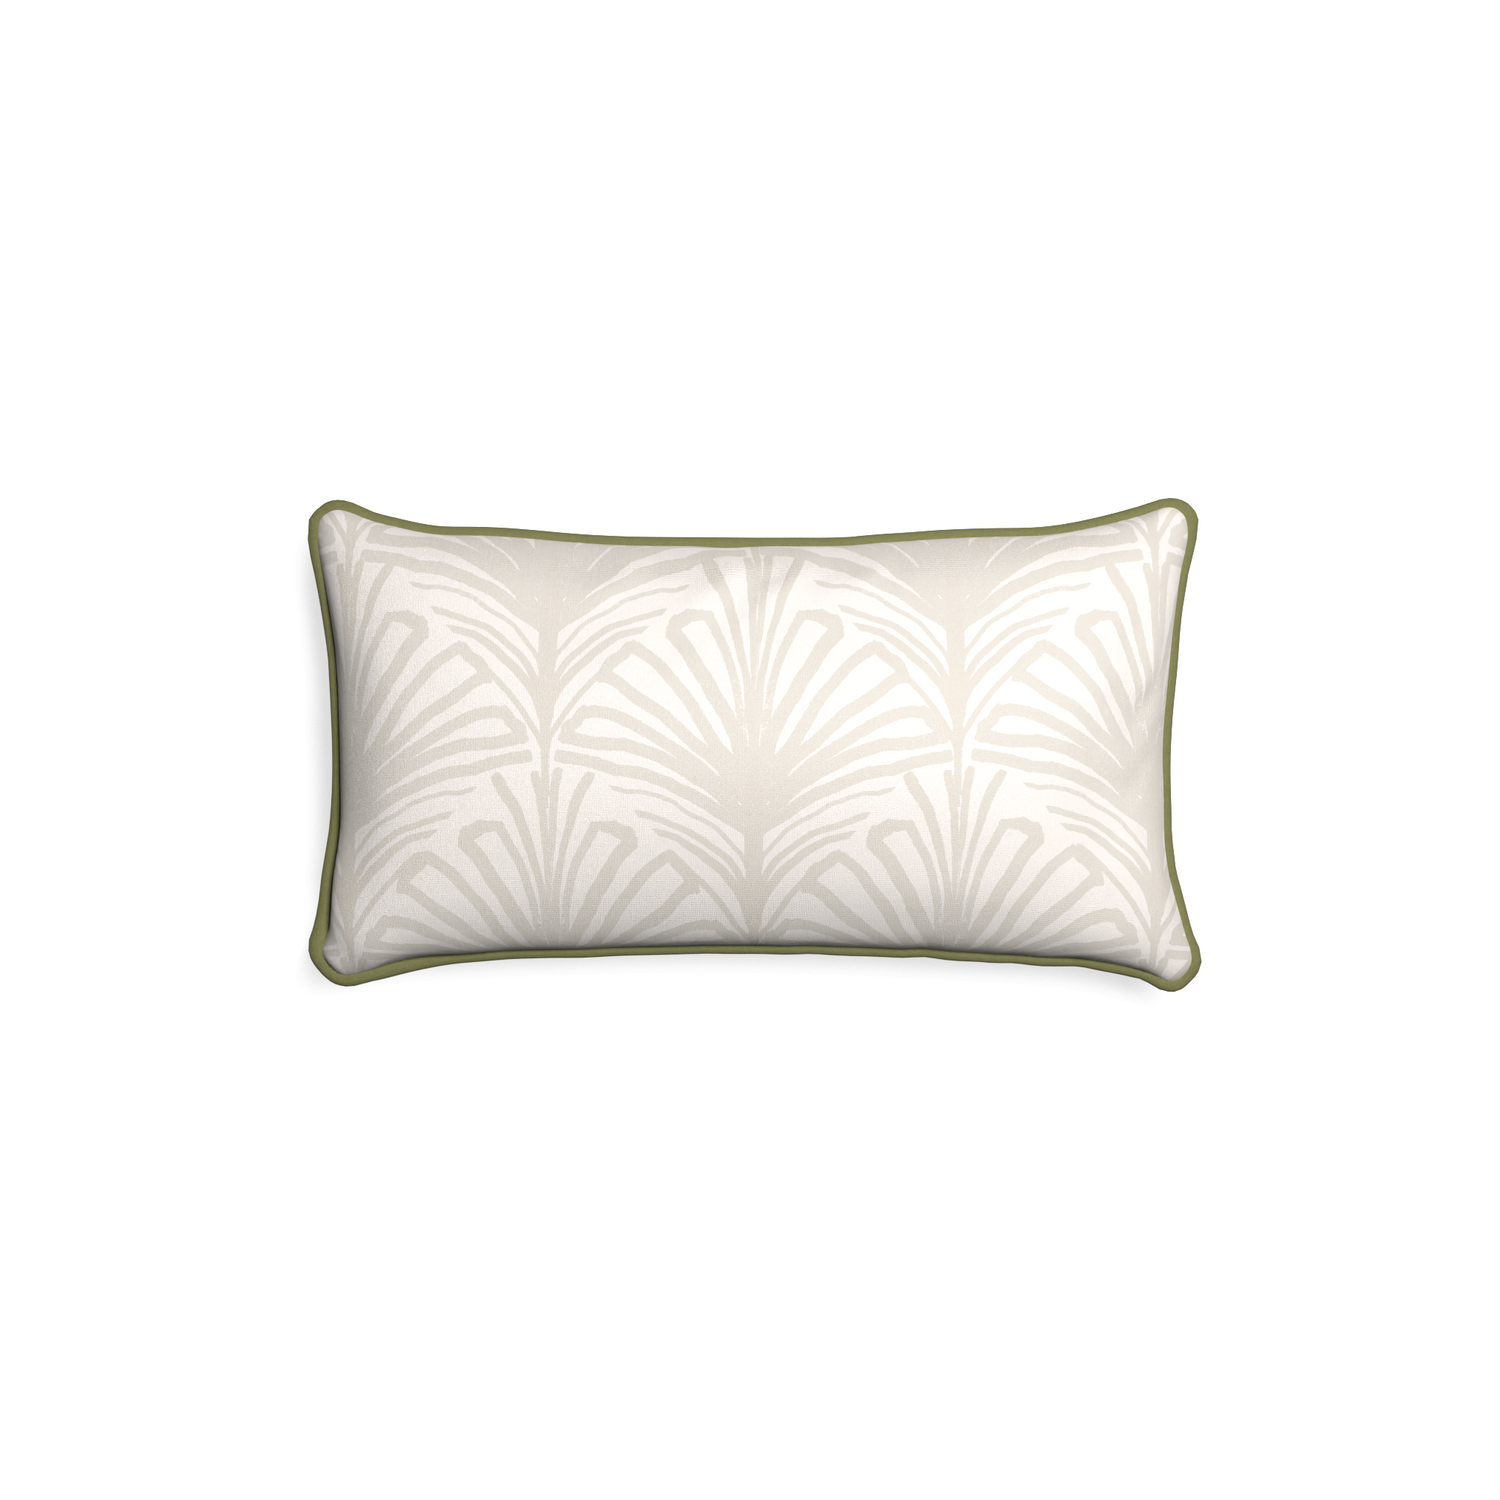 Petite-lumbar suzy sand custom beige palmpillow with moss piping on white background